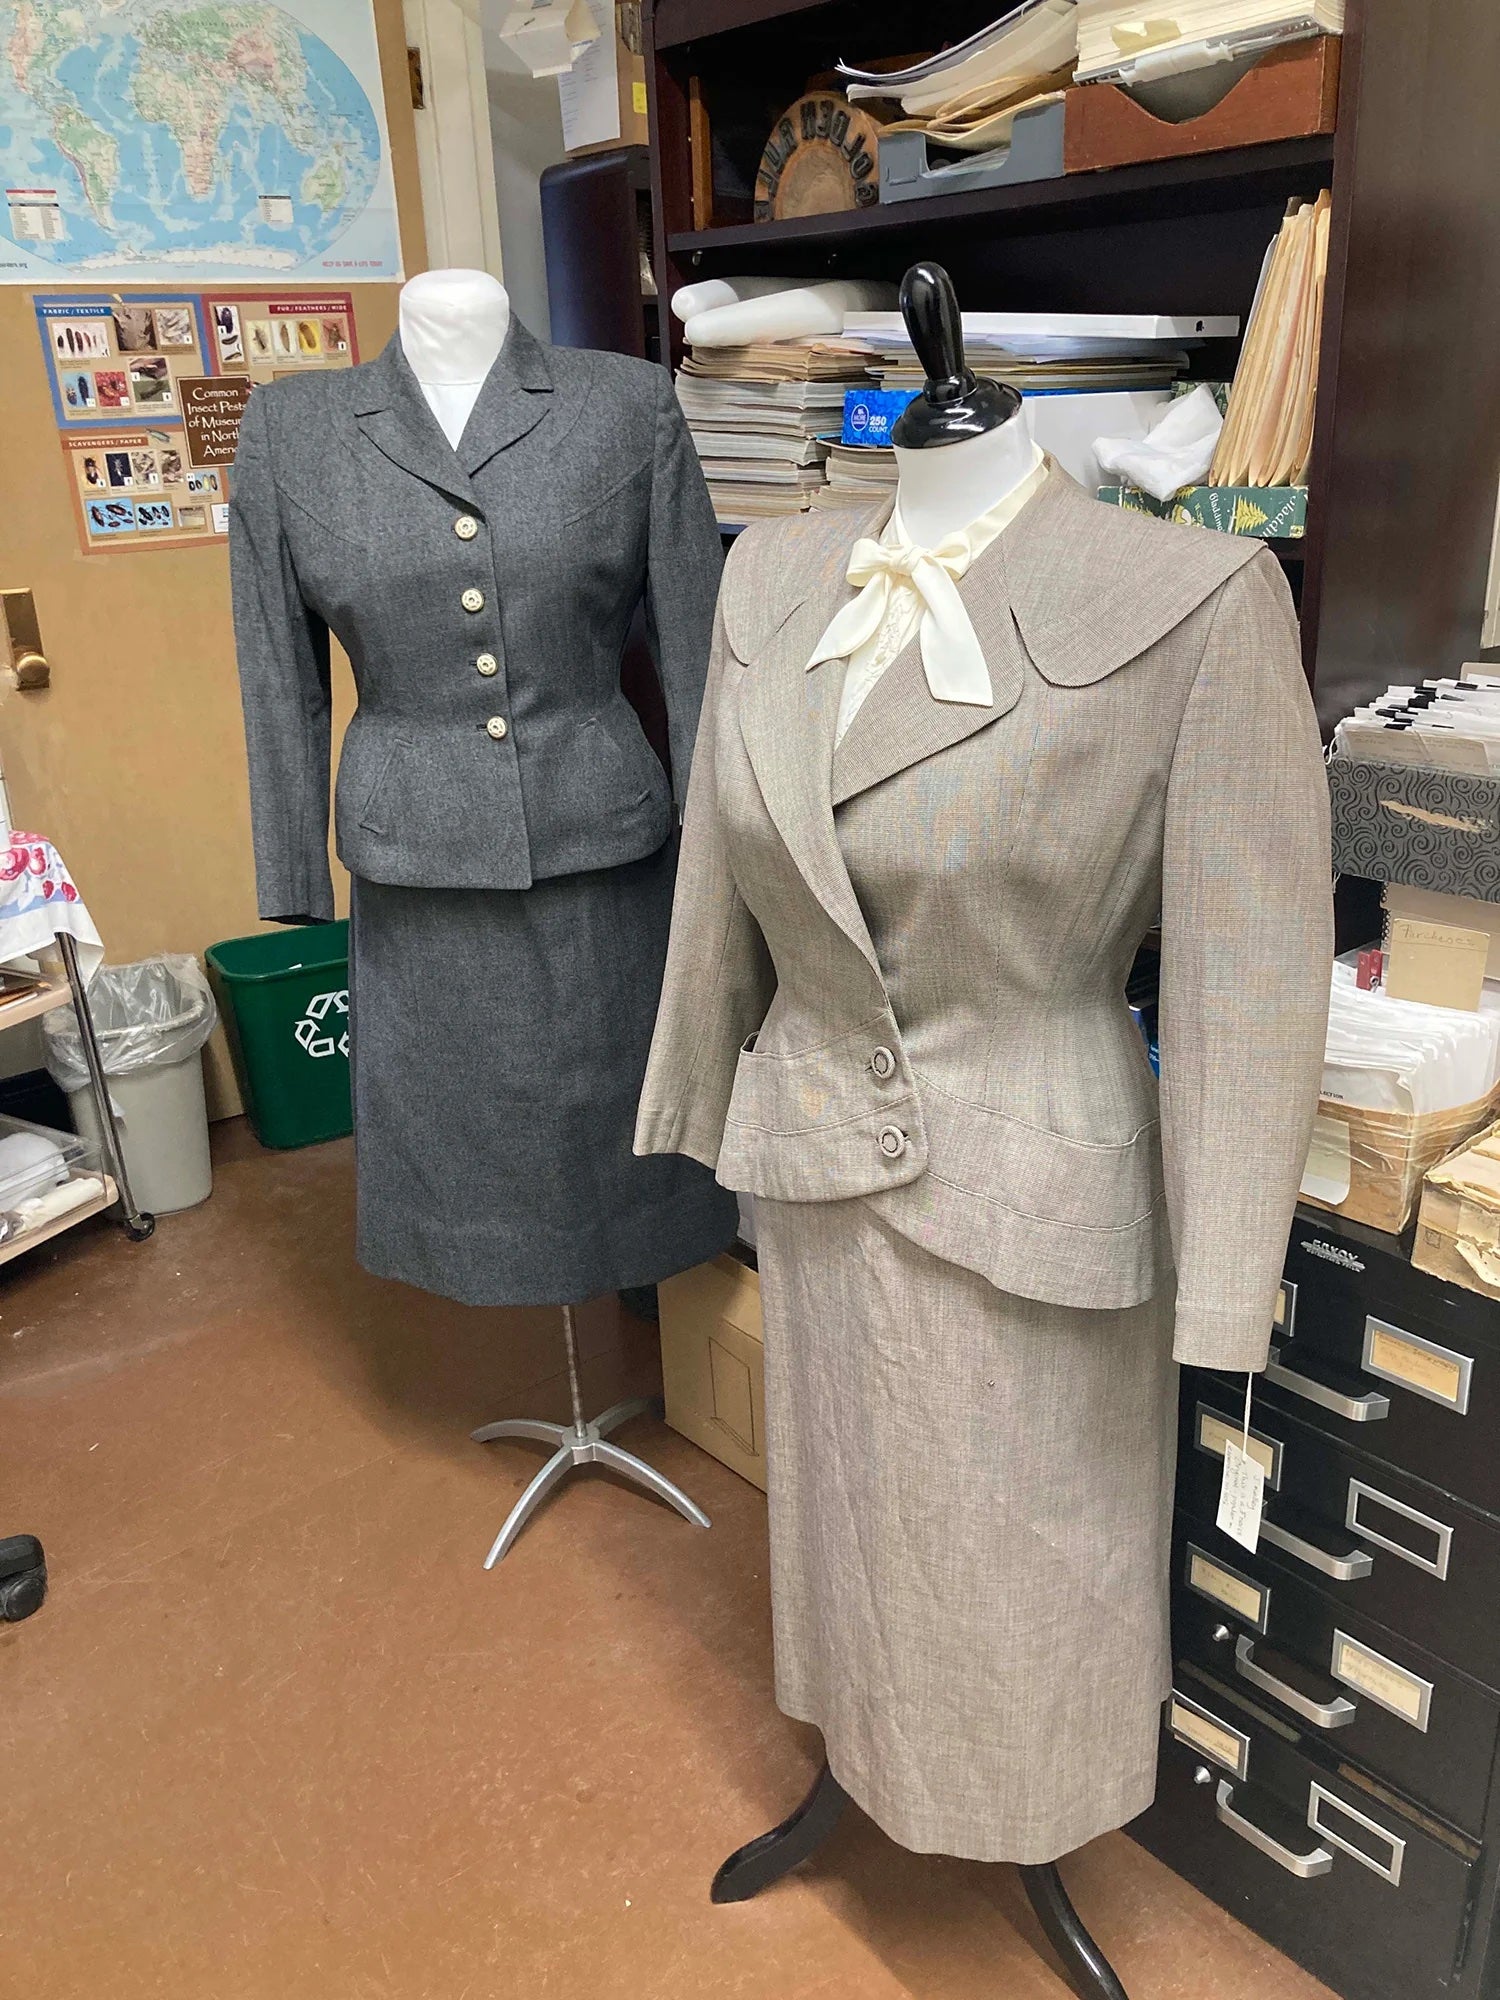 Two women’s suits – from the 1950s (left) and about 1947 – show the influence of the military on style of the time.